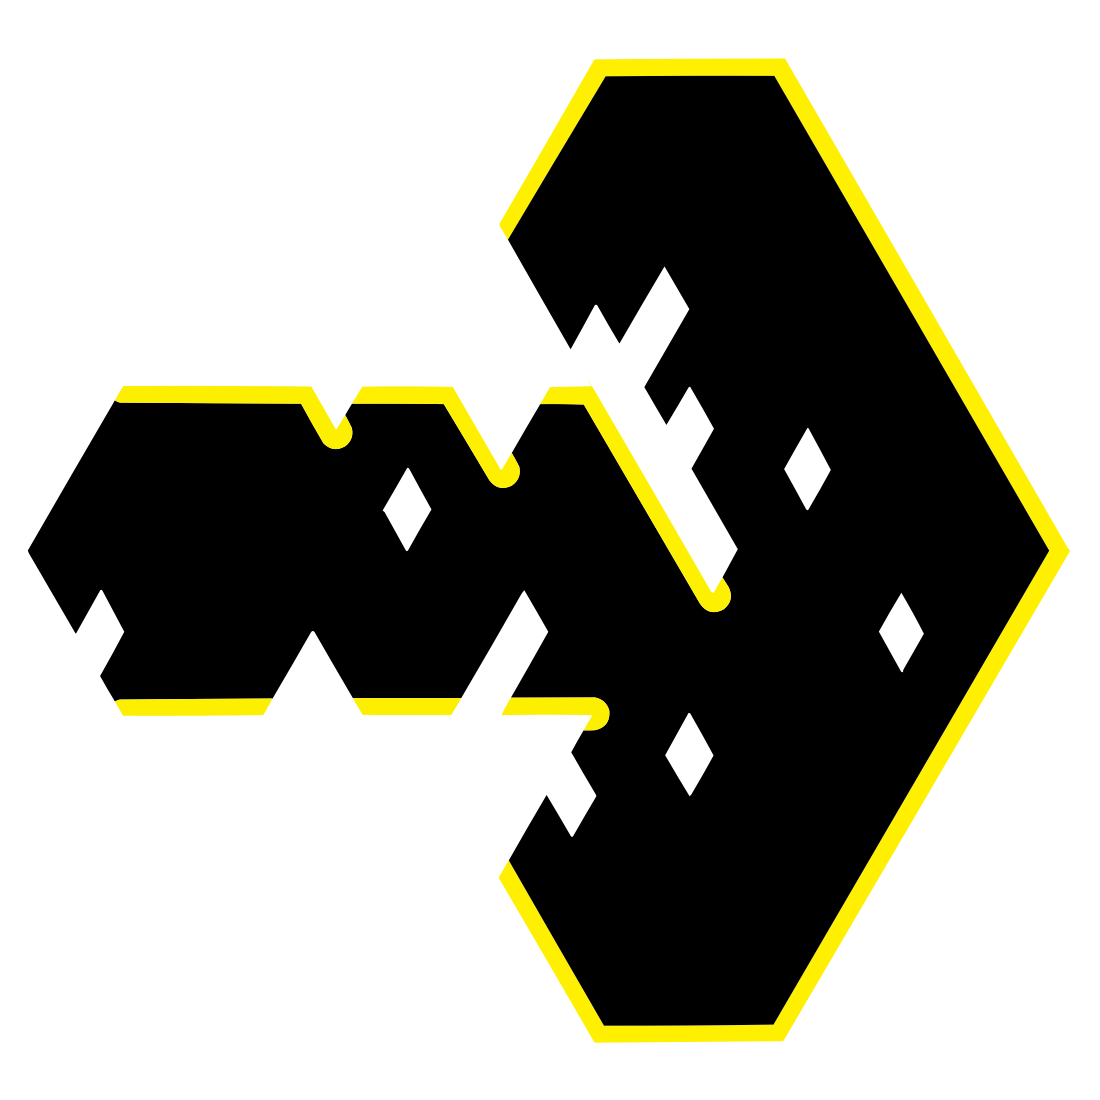 Black Yellow Right Arrow that is being ripped and broken by the diamond shapes, then enriched with yellow stripes preview image.